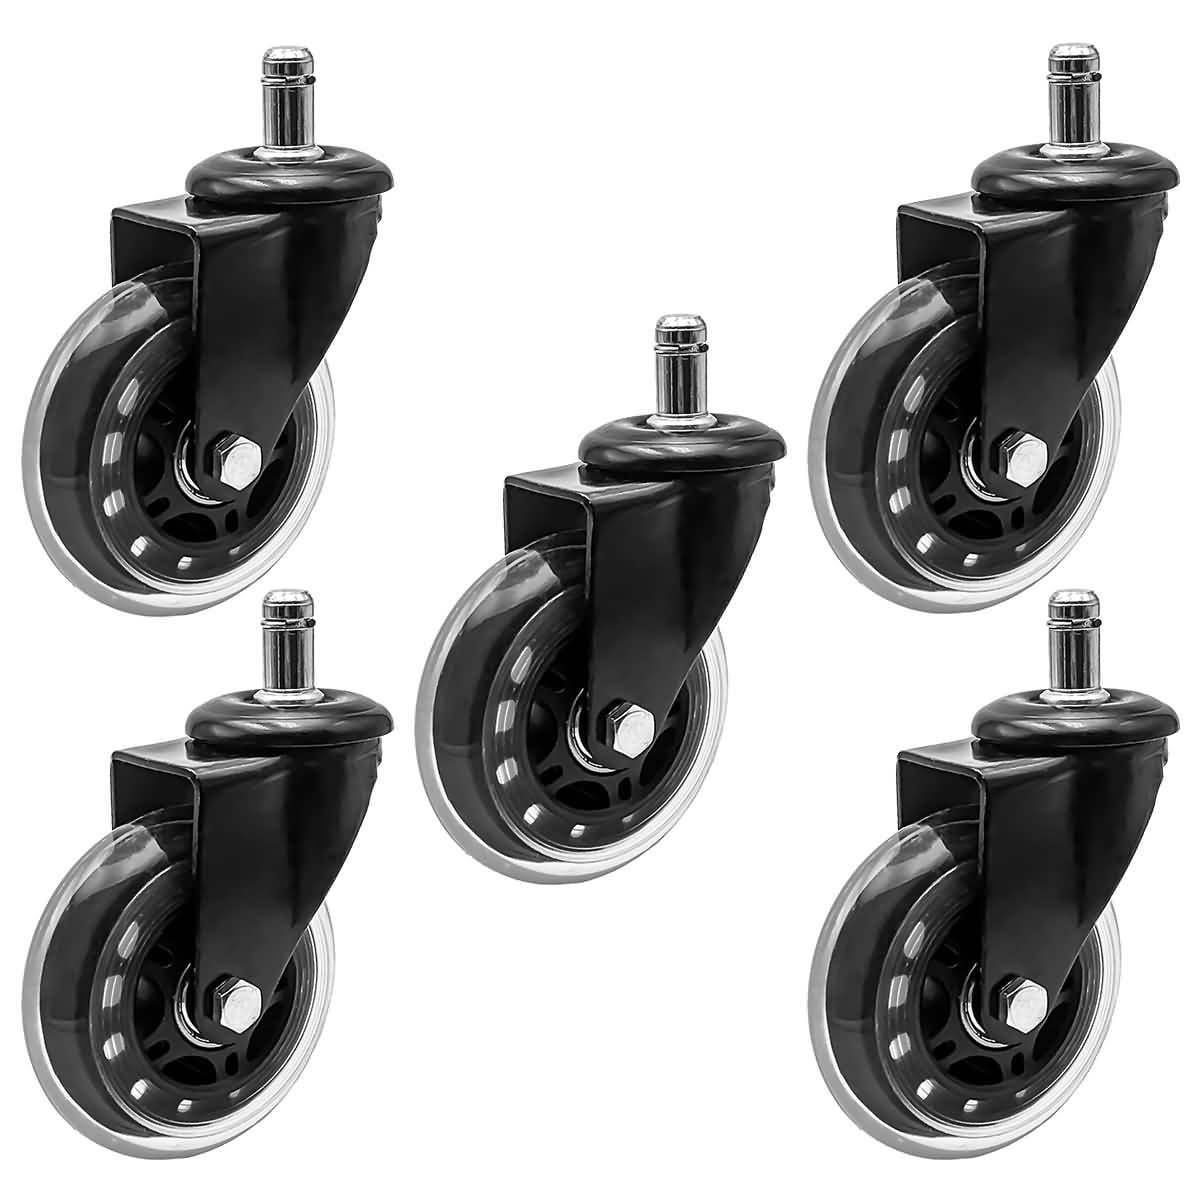 Set of 5 Office Chair Caster Swivel Wheels Replacement Floor Heavy Duty 2 inch 